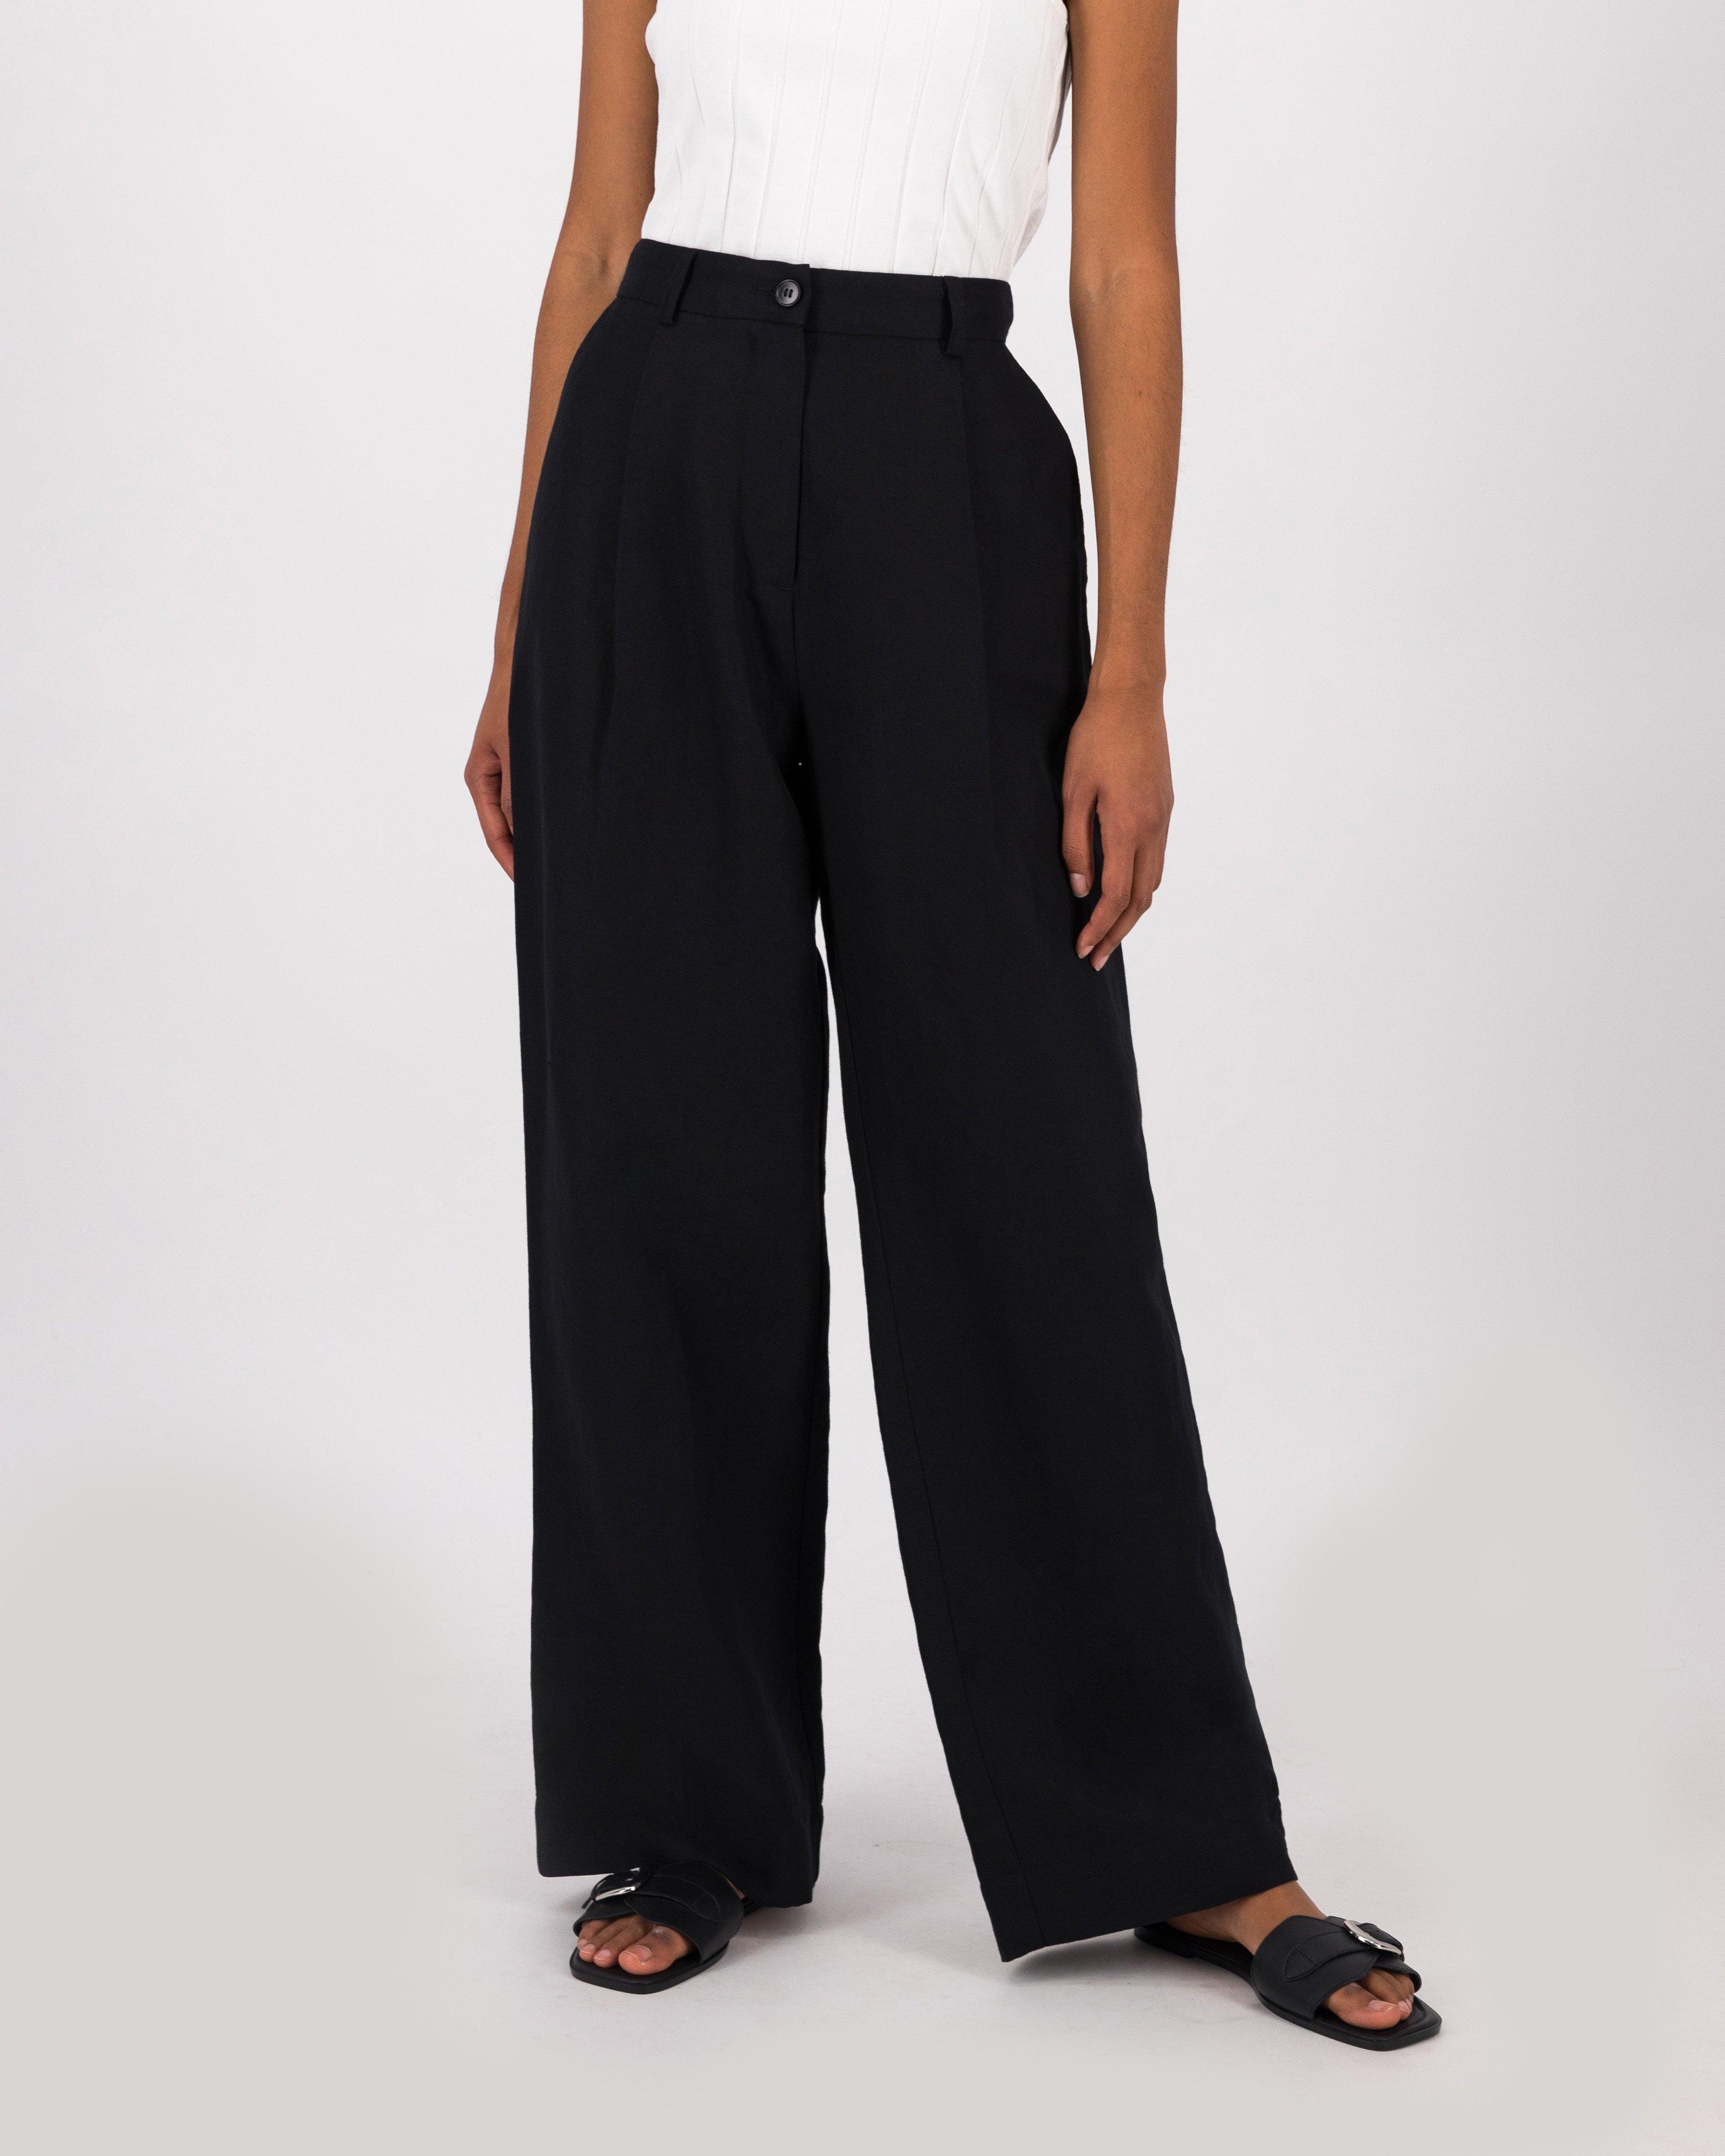 Addey Pleat Detail Pant - Poetry Clothing Store